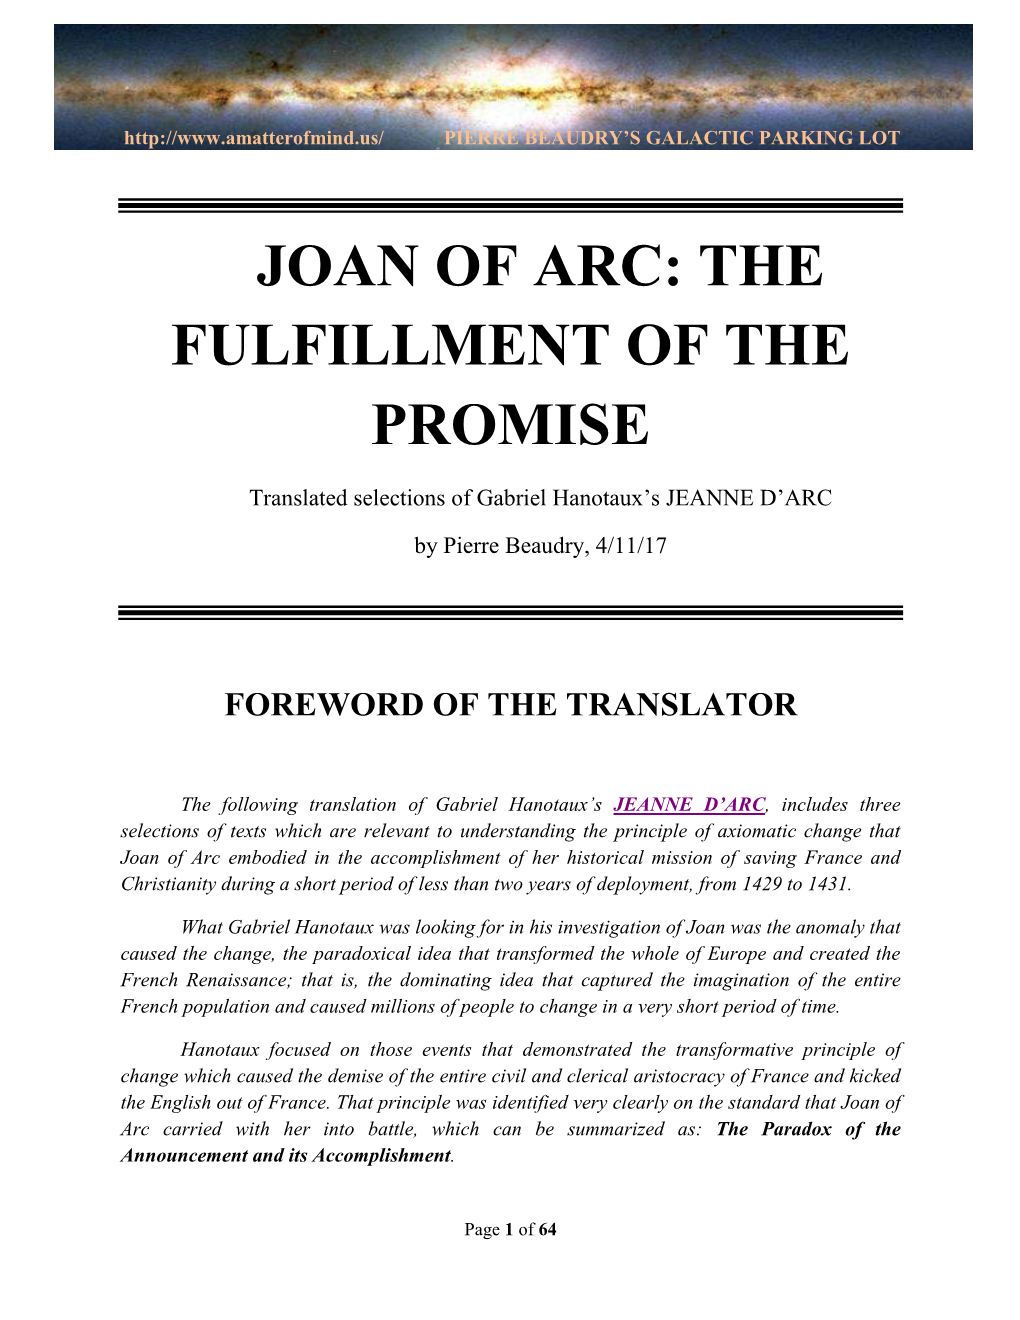 Joan of Arc: the Fulfillment of the Promise